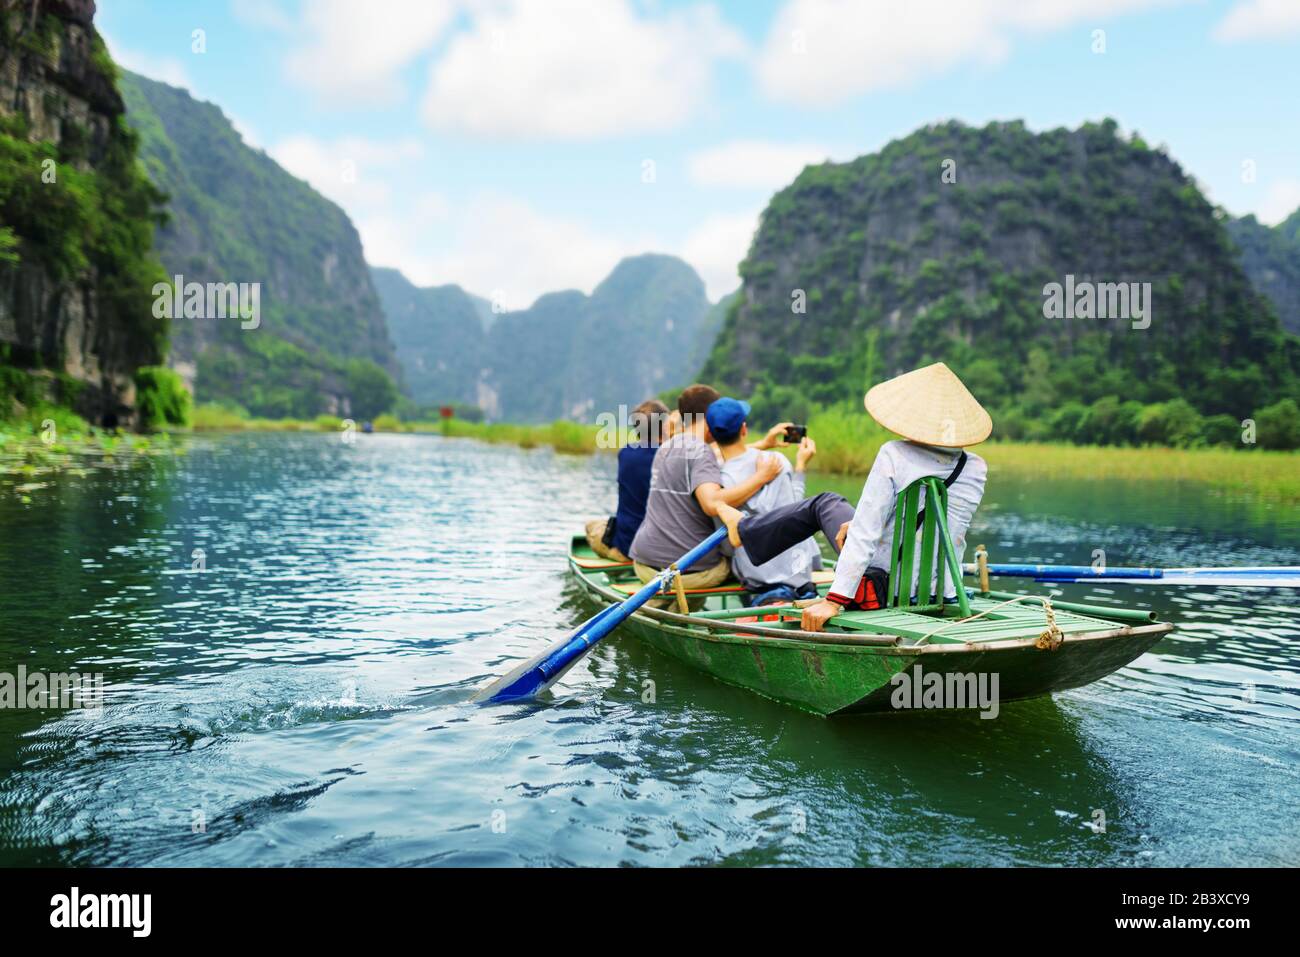 Tourists traveling in boat along the Ngo Dong River and taking picture of the Tam Coc, Ninh Binh, Vietnam. Rower using her feet to propel oars. Landsc Stock Photo